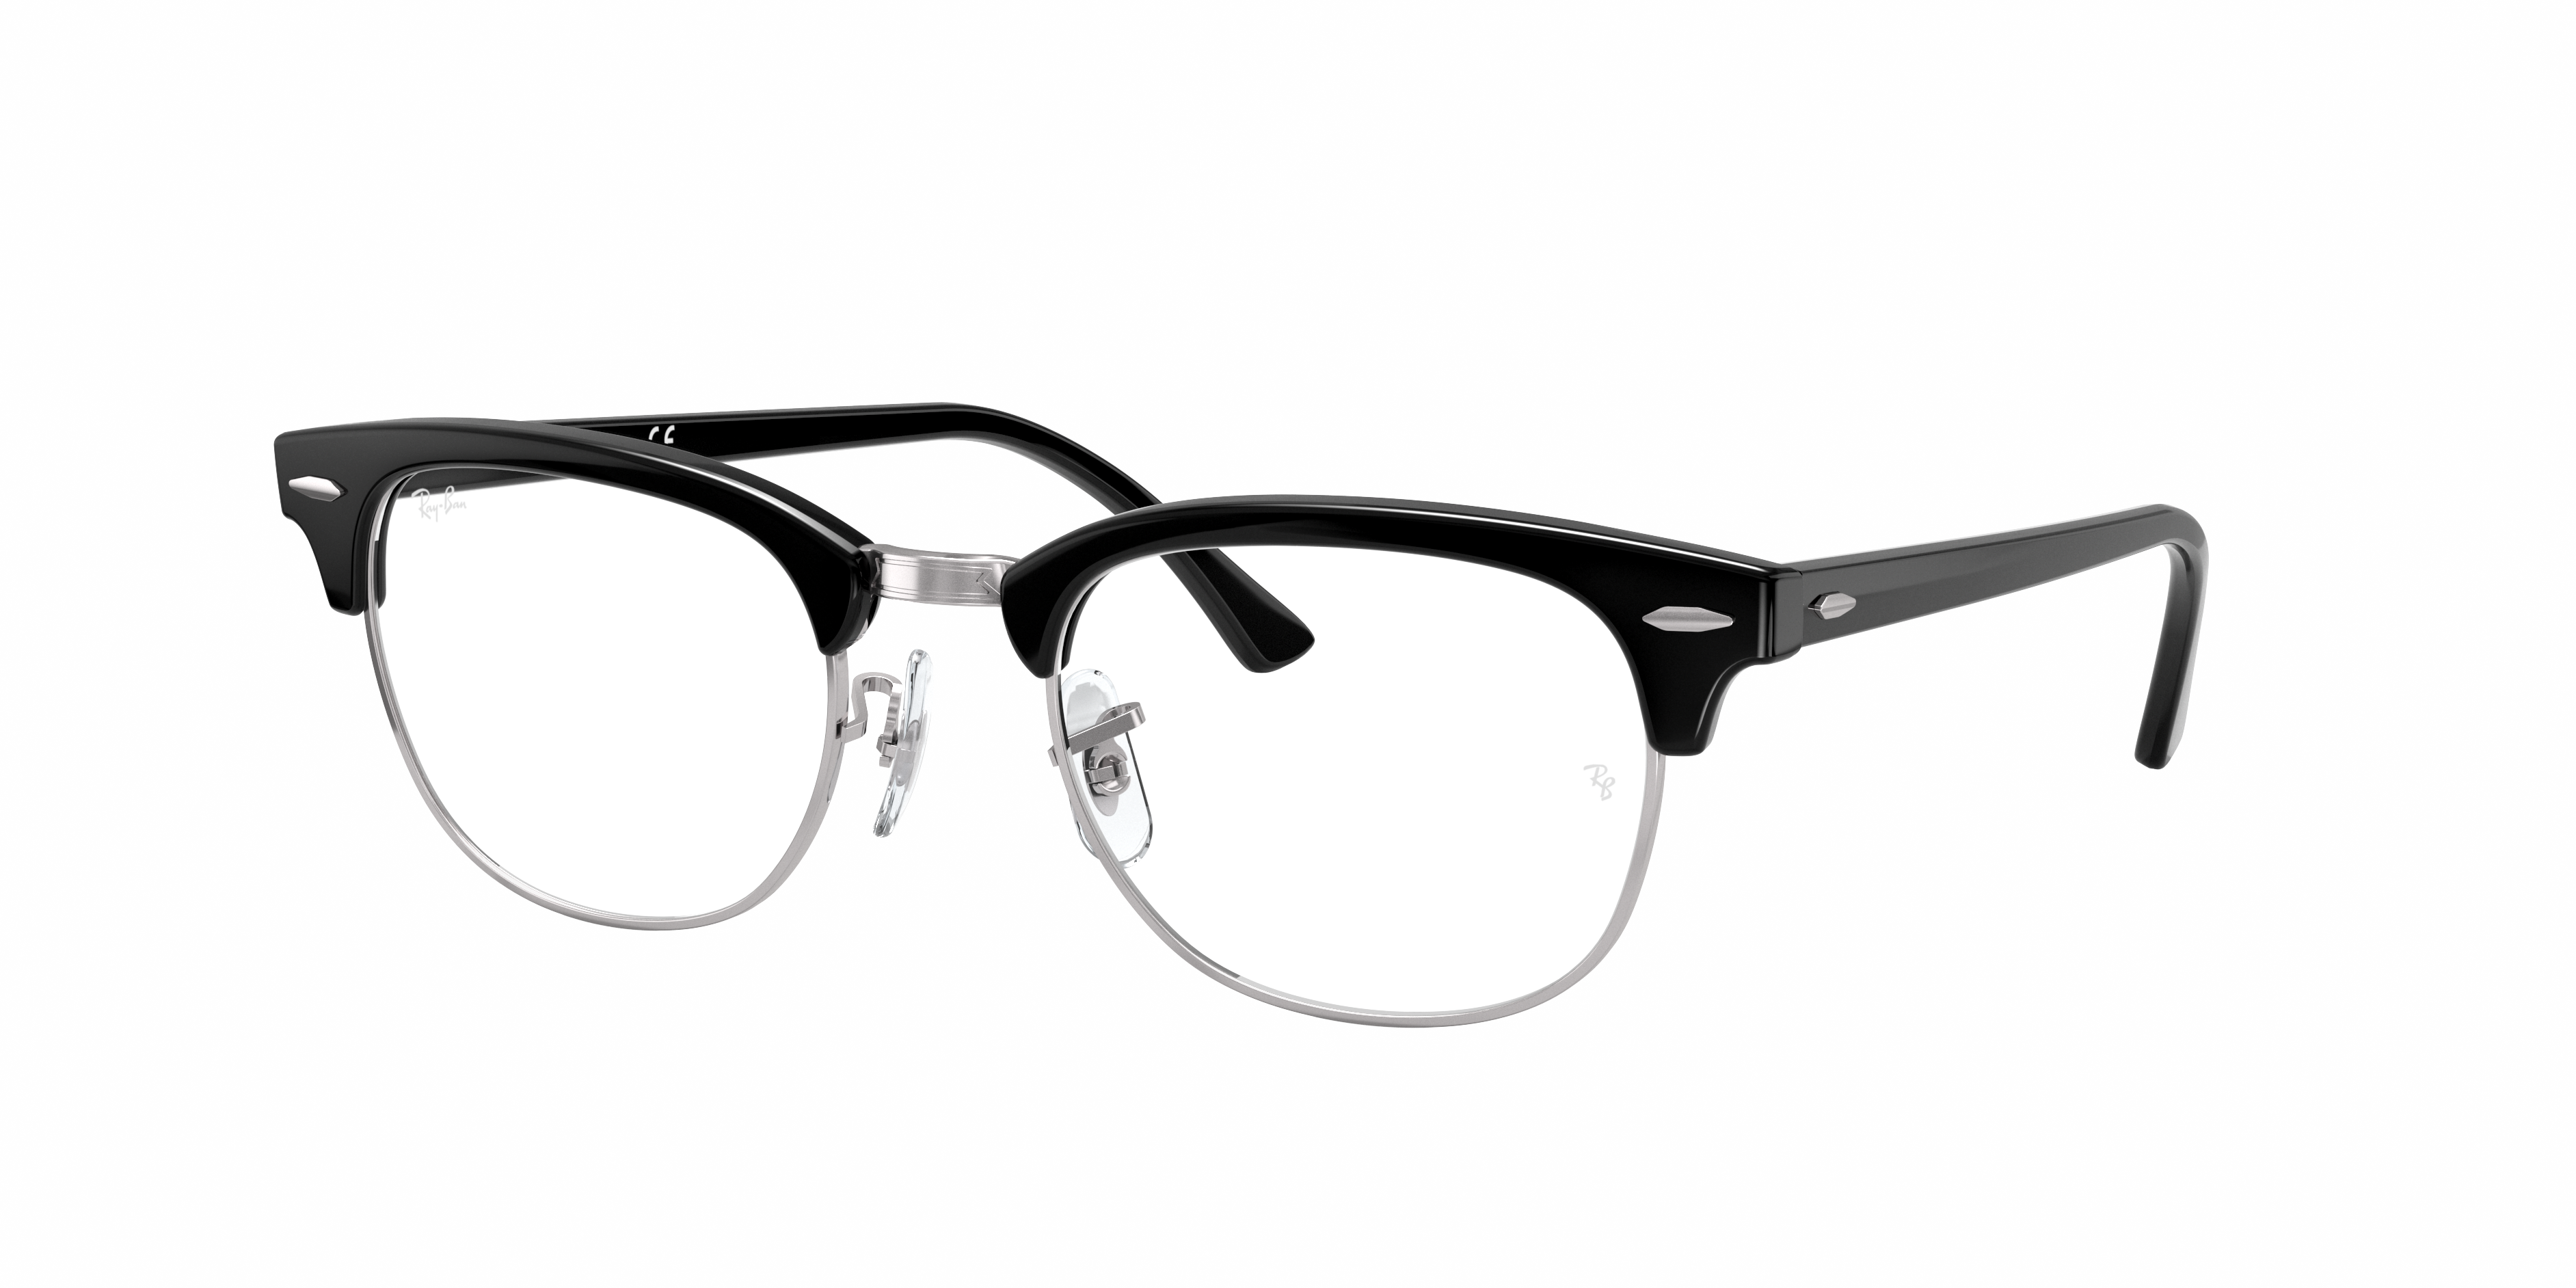 Clubmaster Optics Eyeglasses With Black On Silver Frame Ray Ban